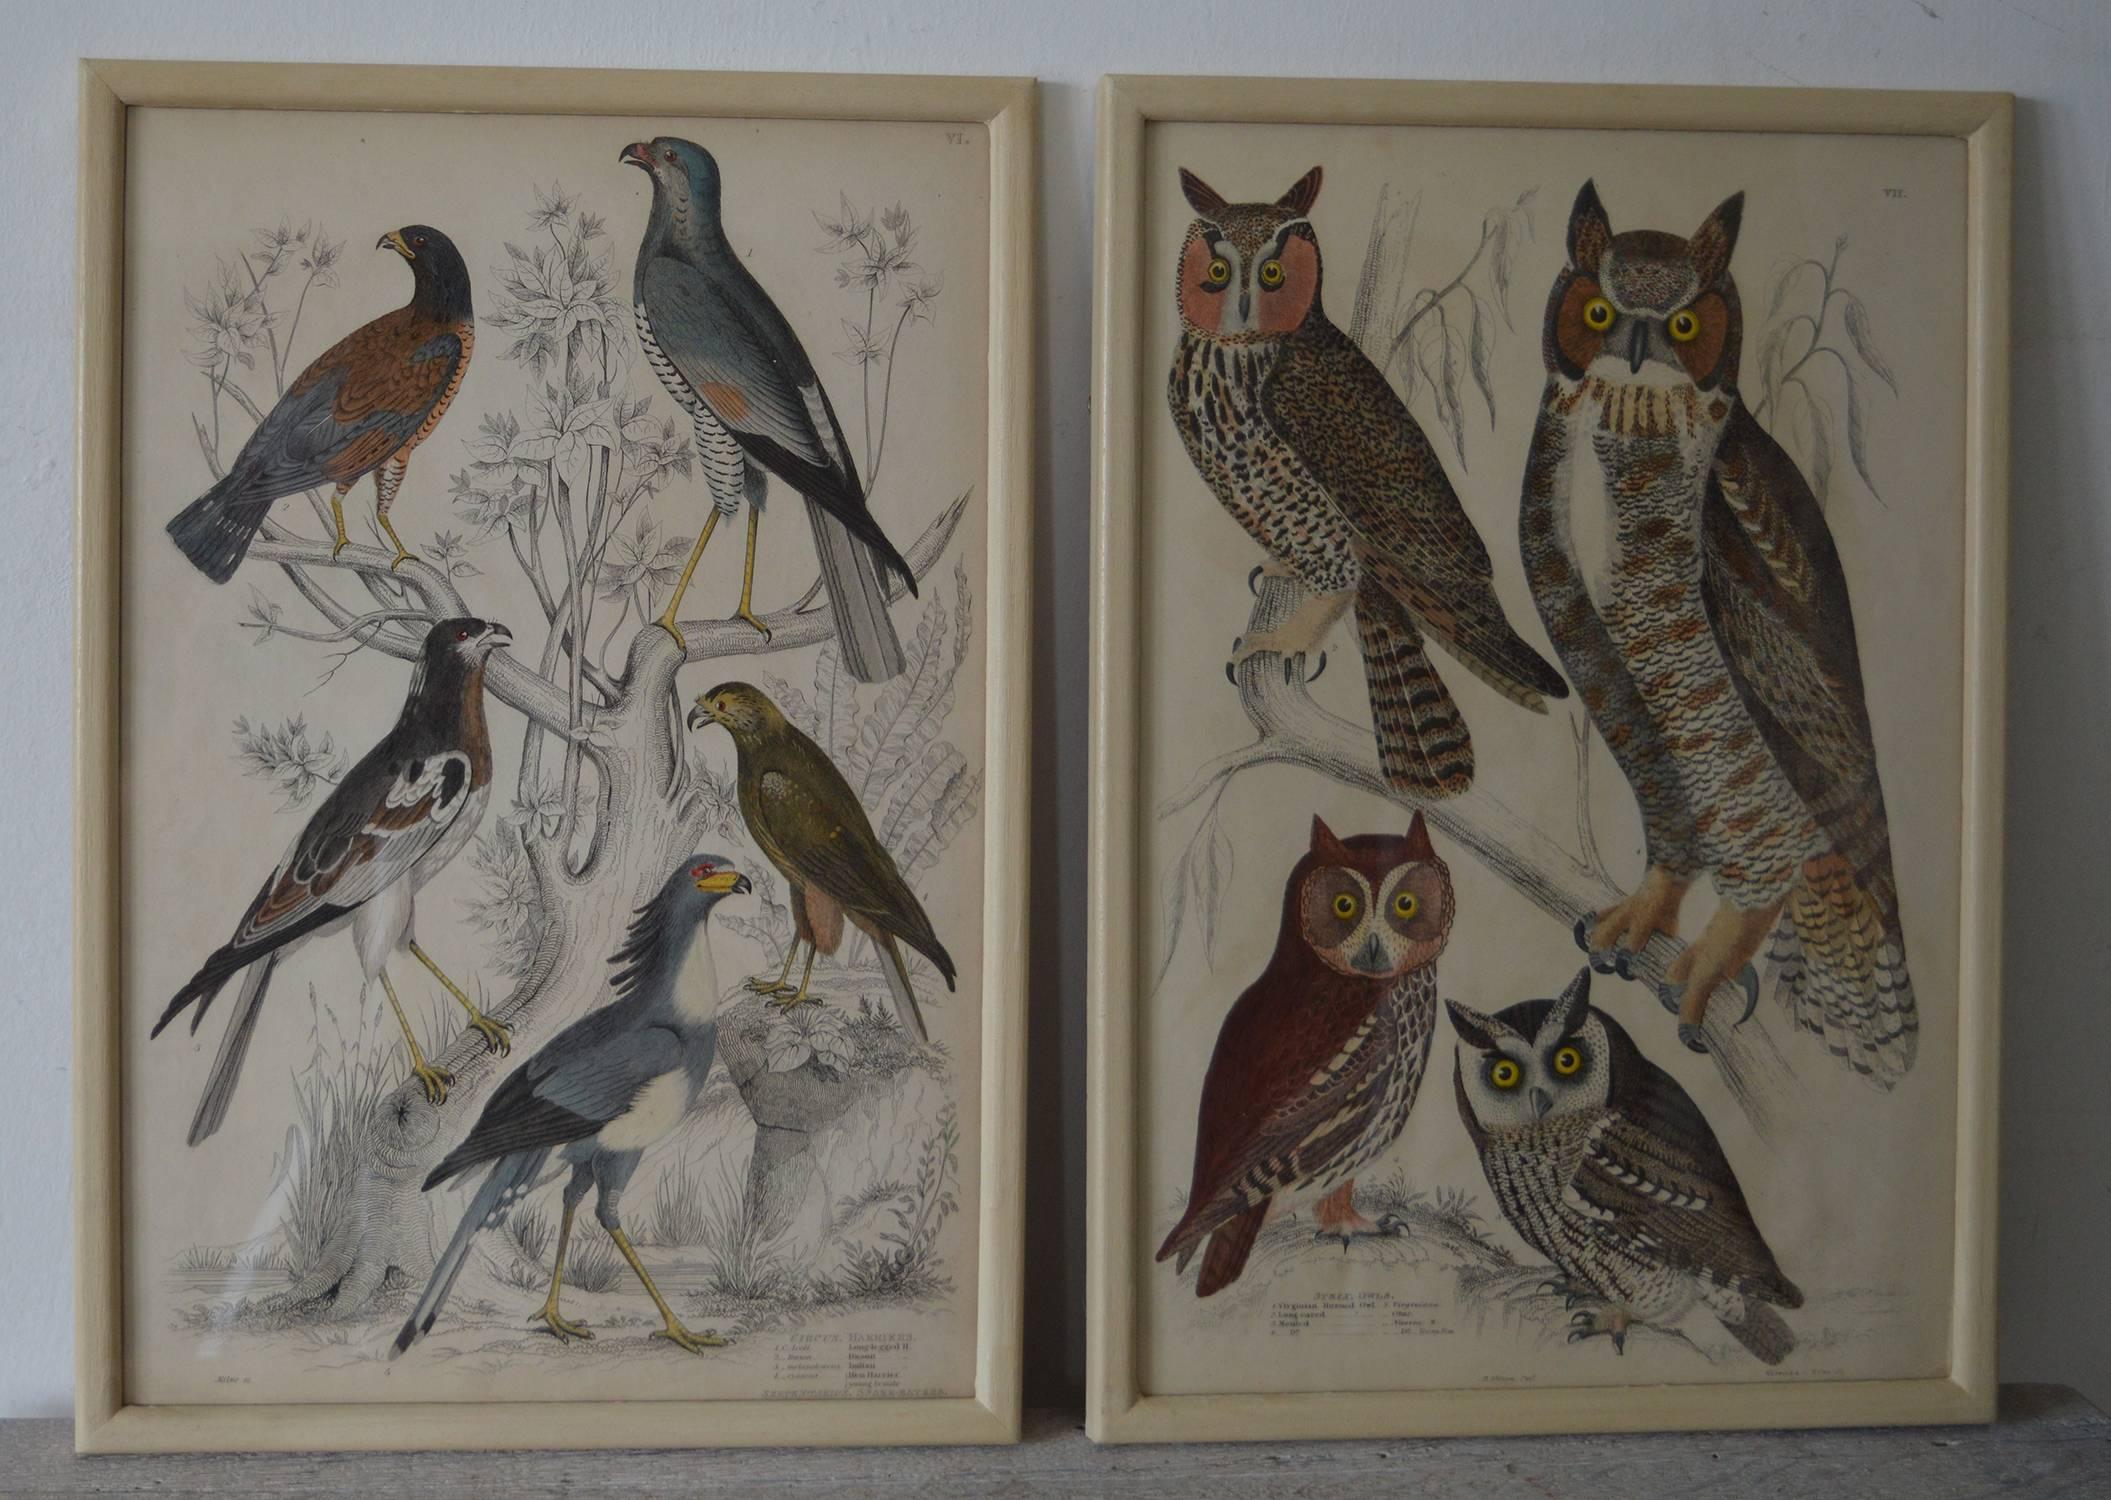 Other Set of 18 ( 12 + 6 ) Antique Bird Prints in Faux Ivory Frames, 1830s